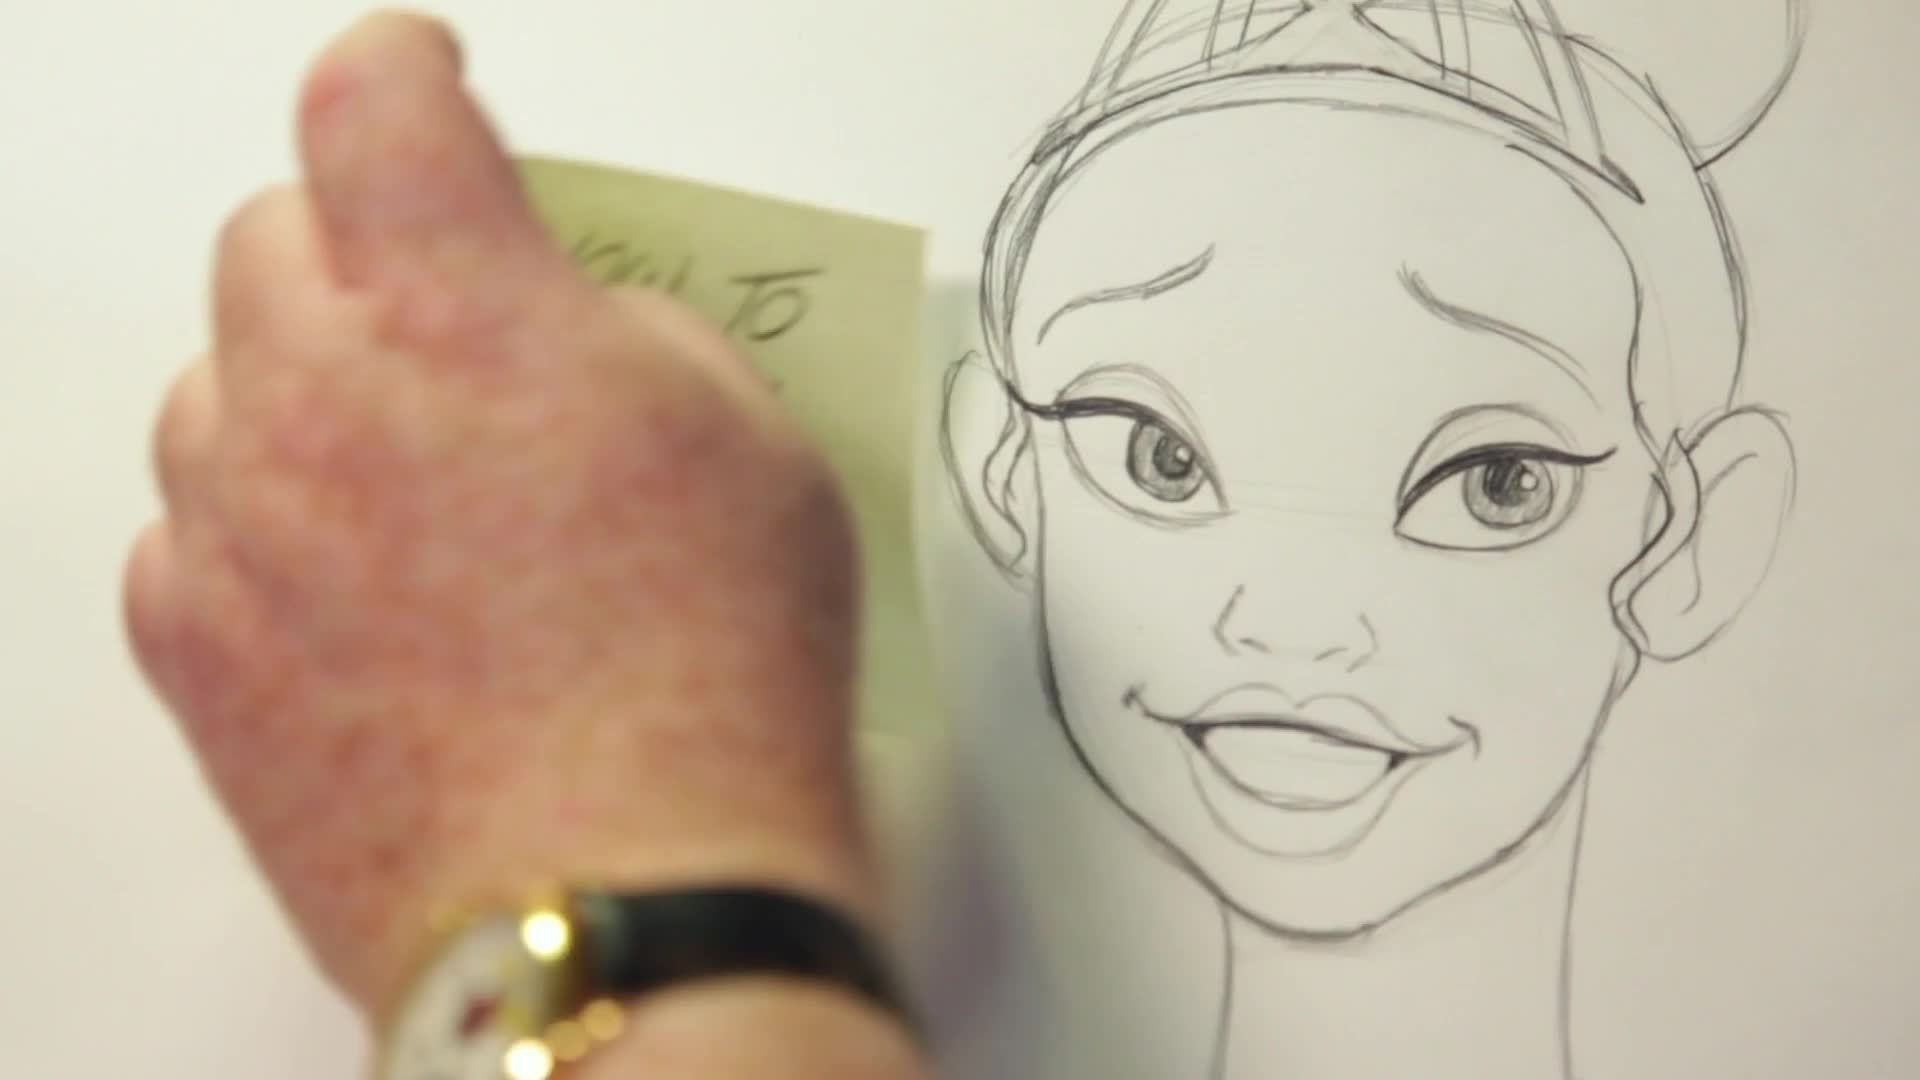 How to Draw Princess Tiana from The Princess and the Frog